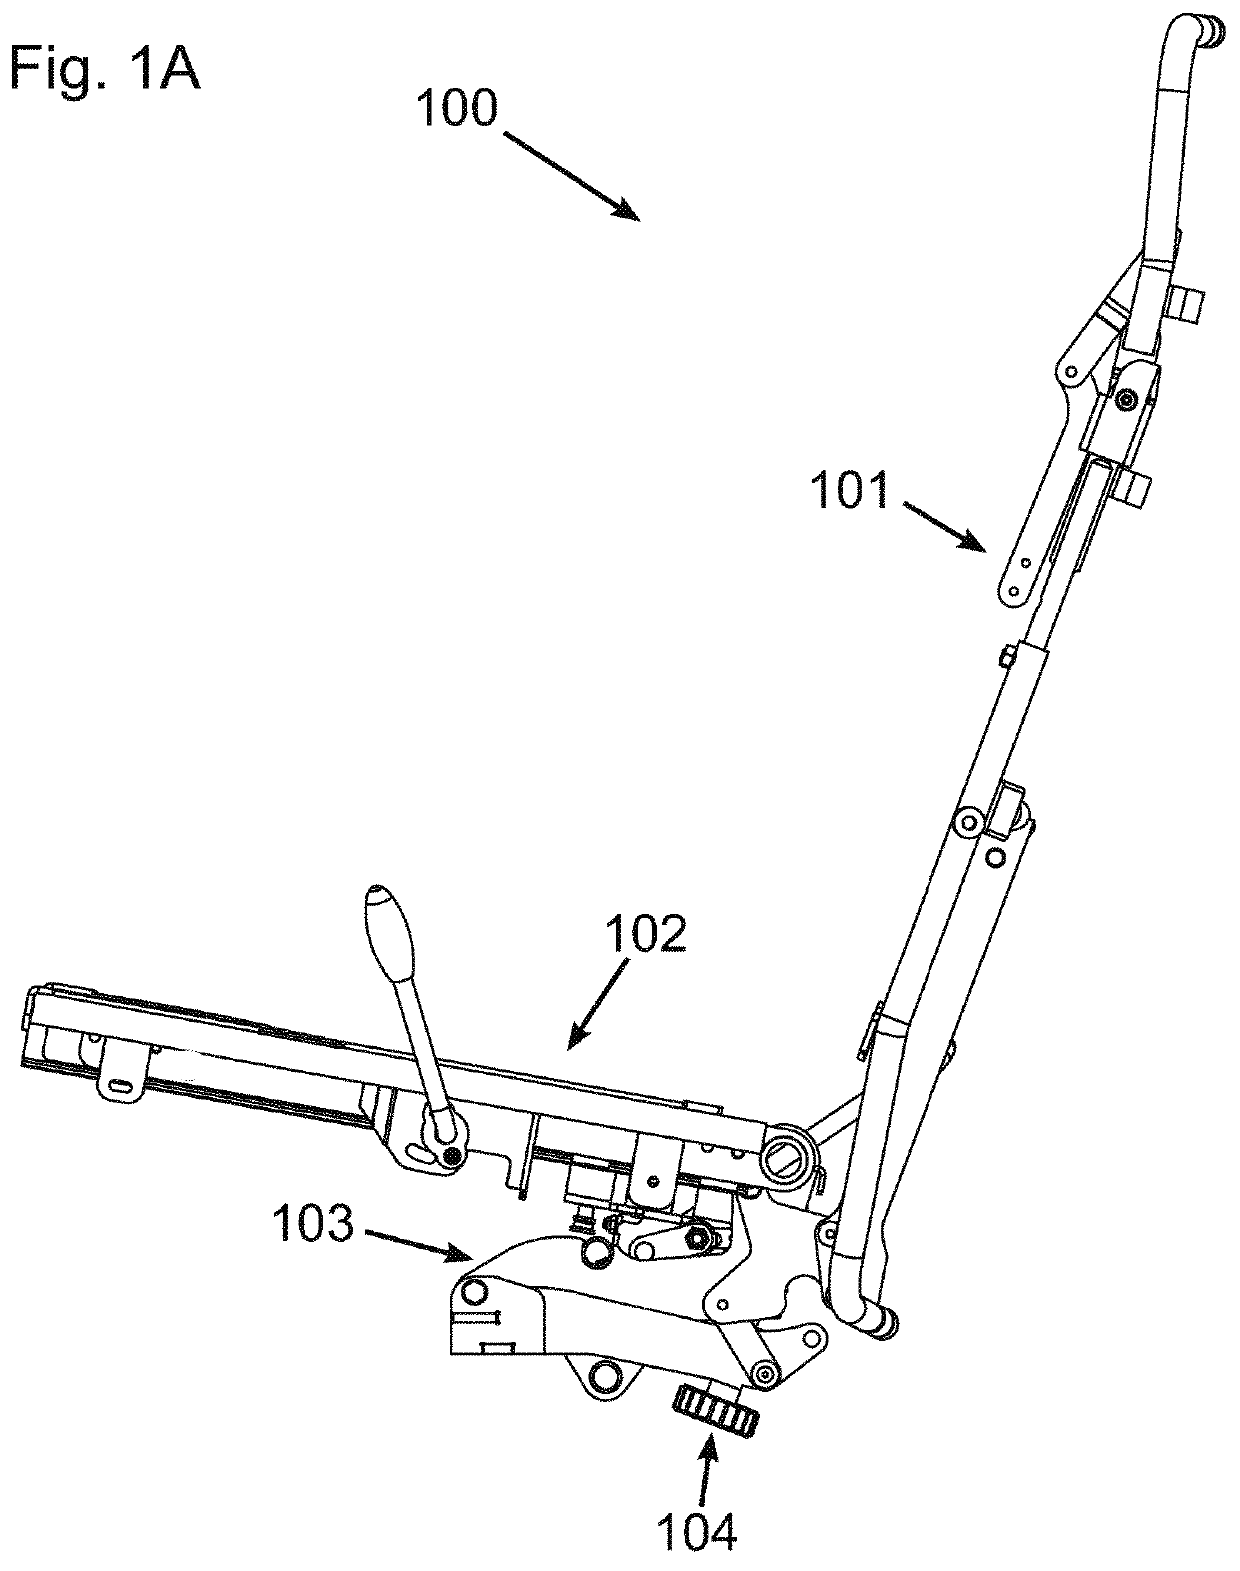 Item of seating furniture with a spring-mounted backrest